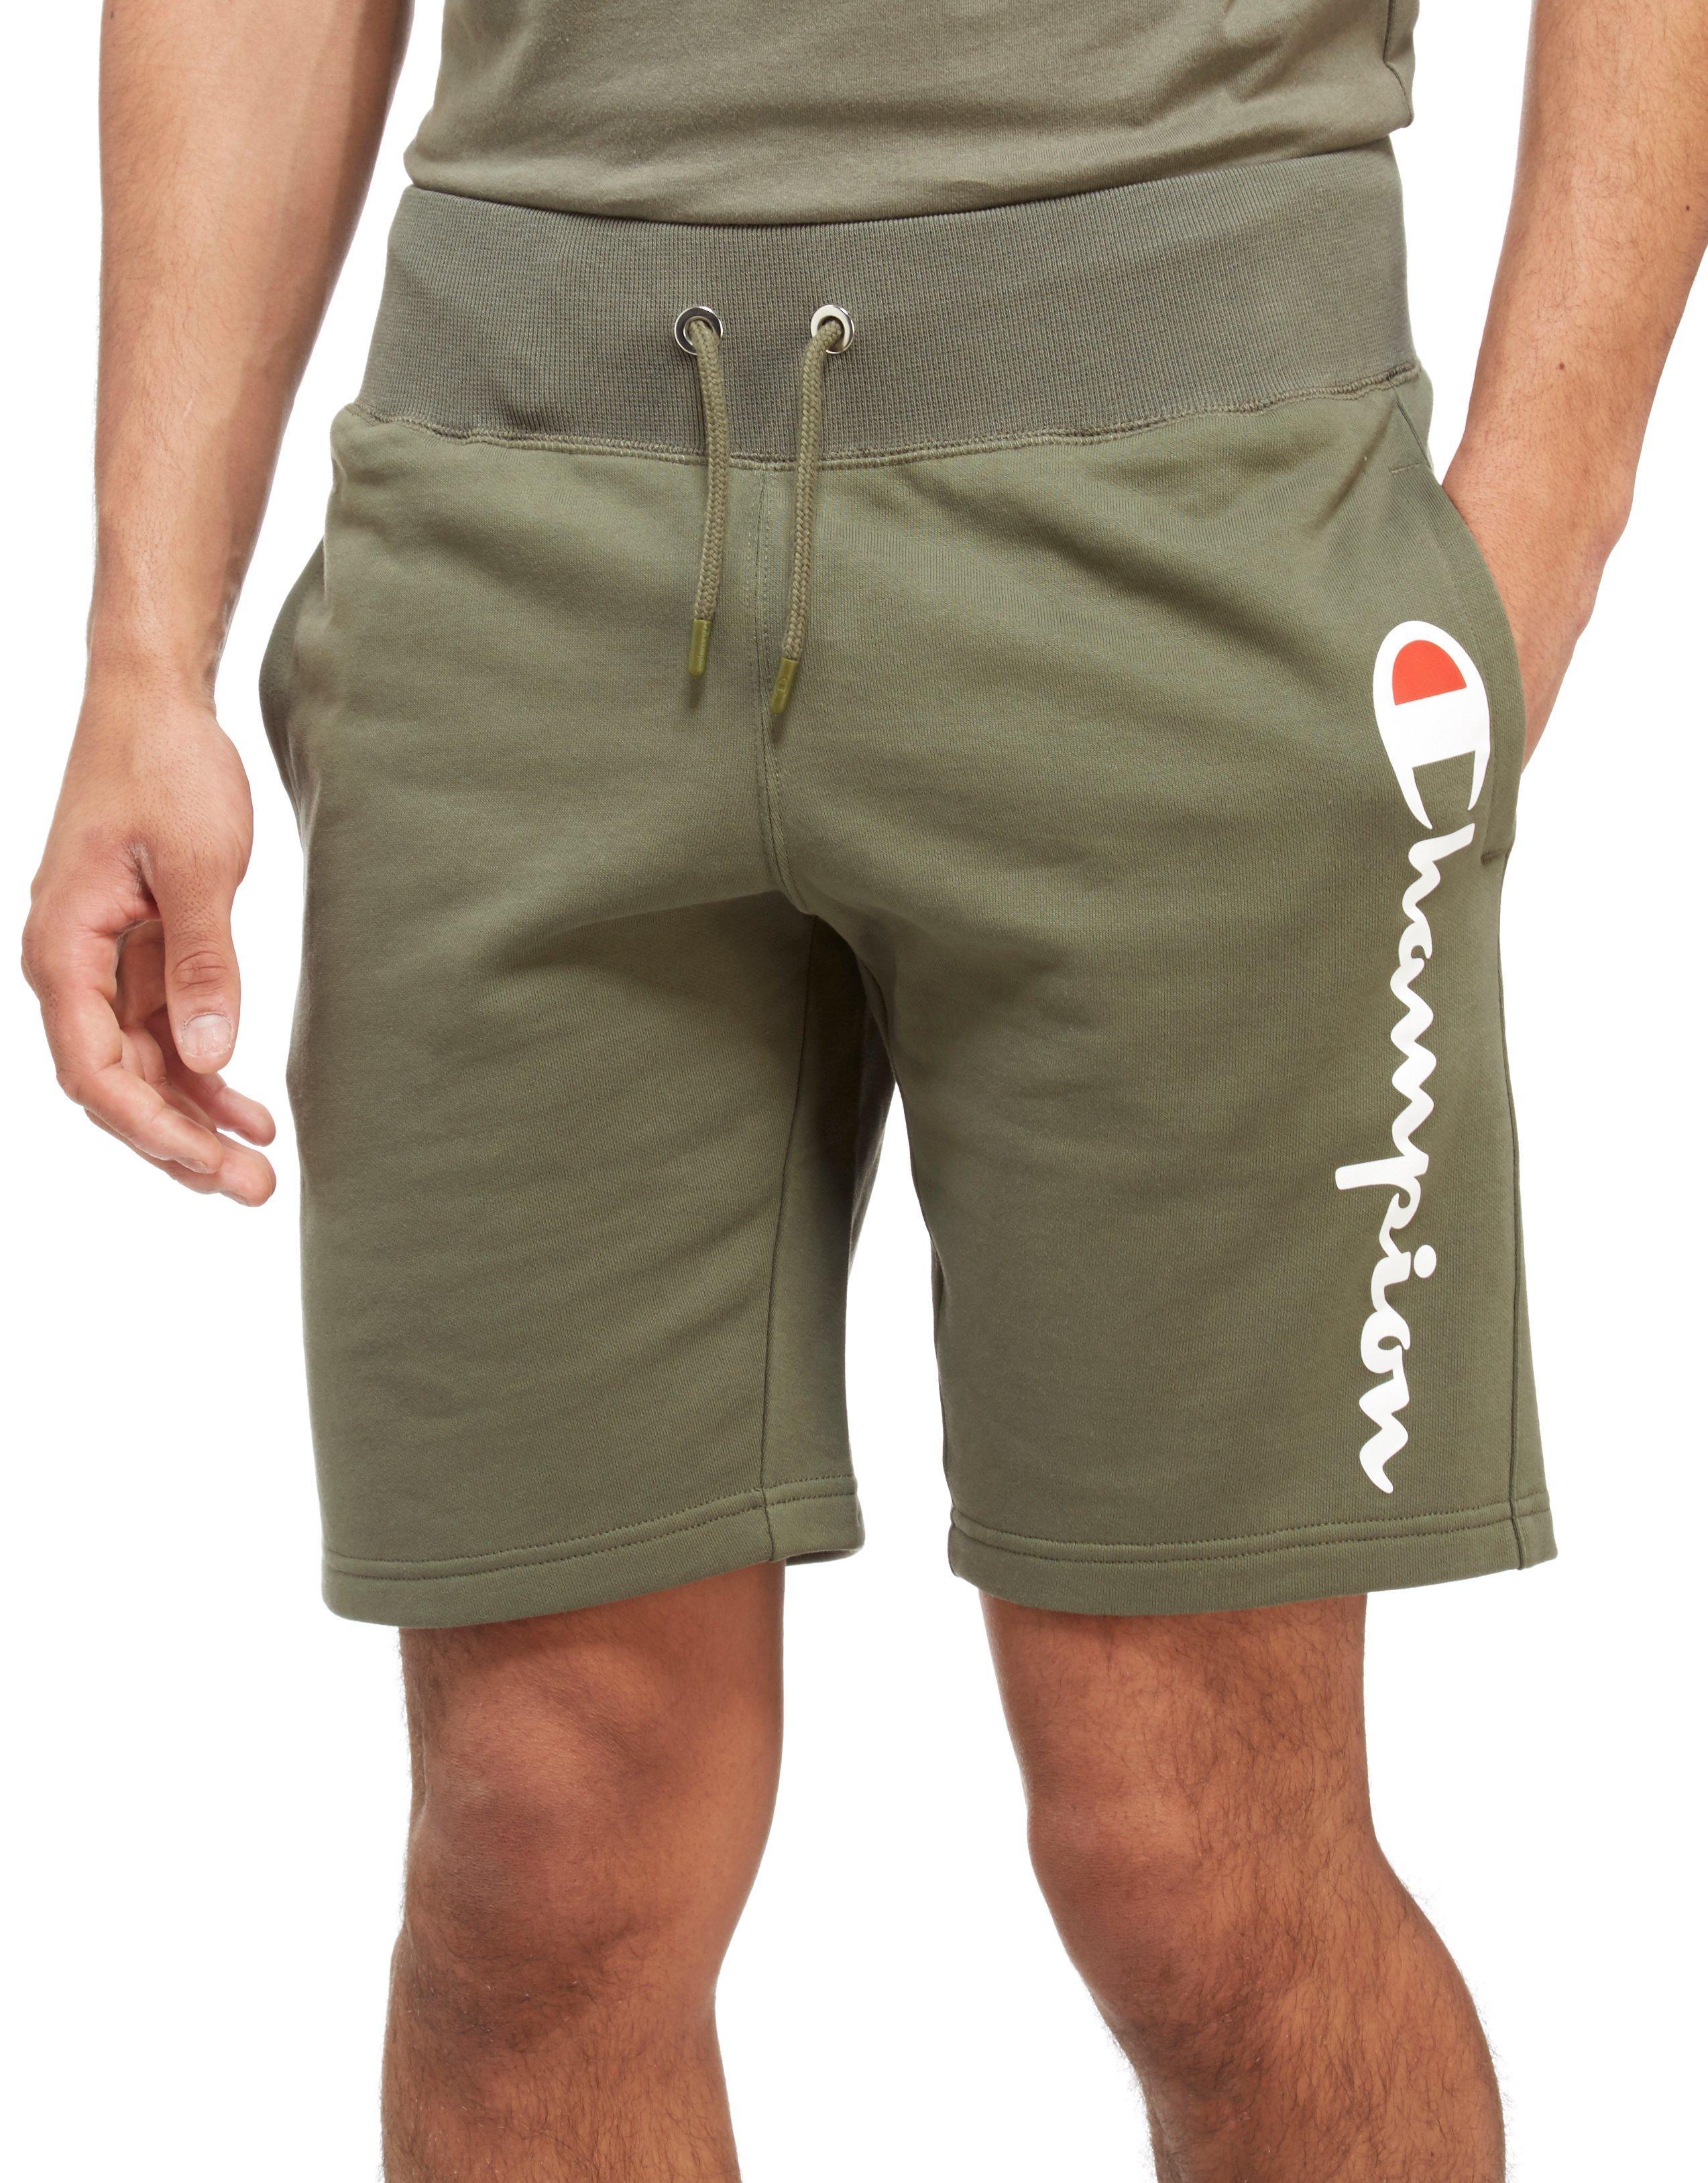 Lyst - Champion Core Shorts in Green for Men